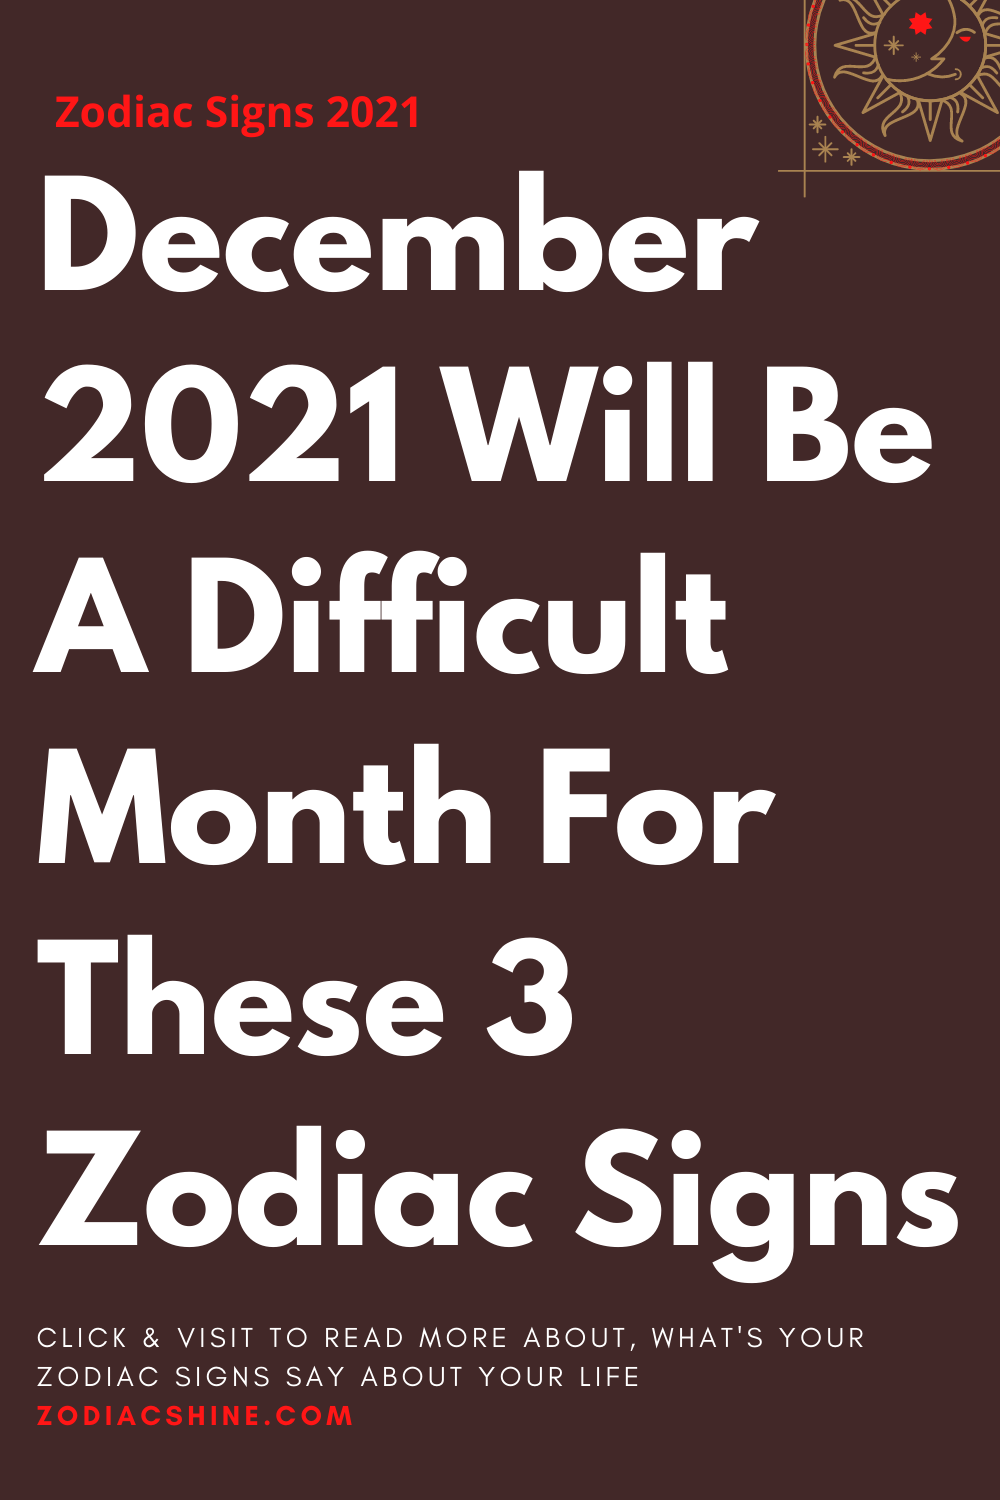 December 2021 Will Be A Difficult Month For These 3 Zodiac Signs